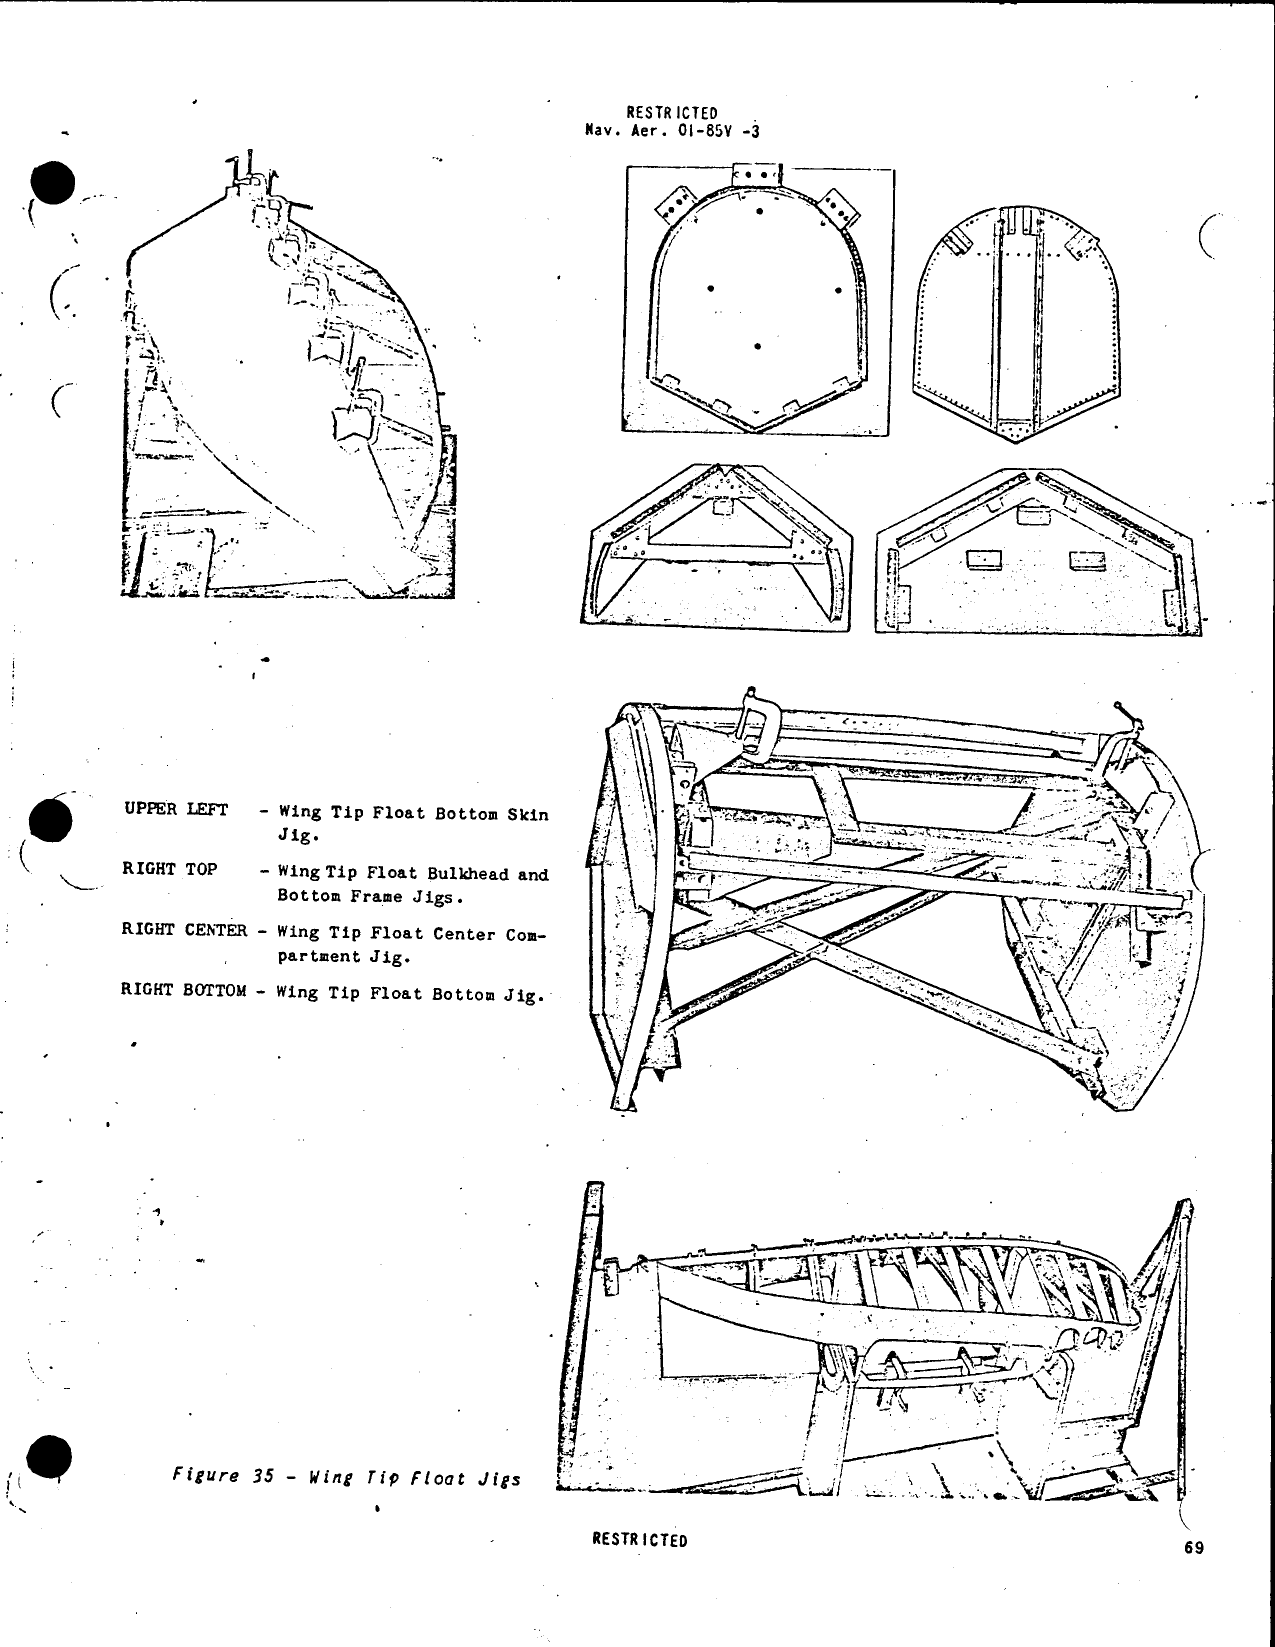 Sample page  76 from AirCorps Library document: Structural Repair - Grumman Goose - JRF-1, JRF-2, JRF-3, JRF-4, JRF-5, JRF-6B